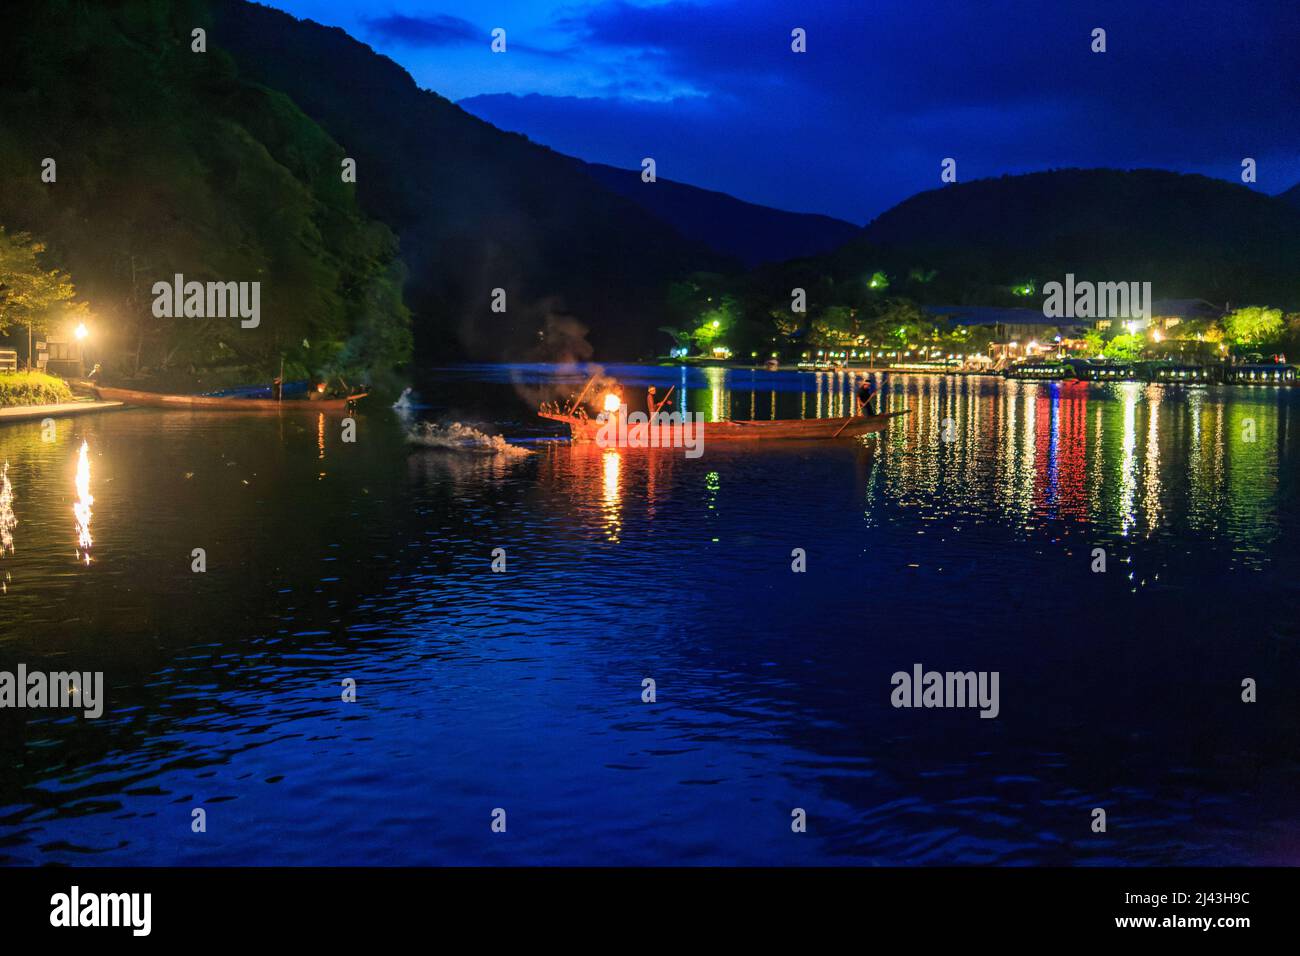 Small boat with fire used to lure fish on blue river in Kyoto at night Stock Photo